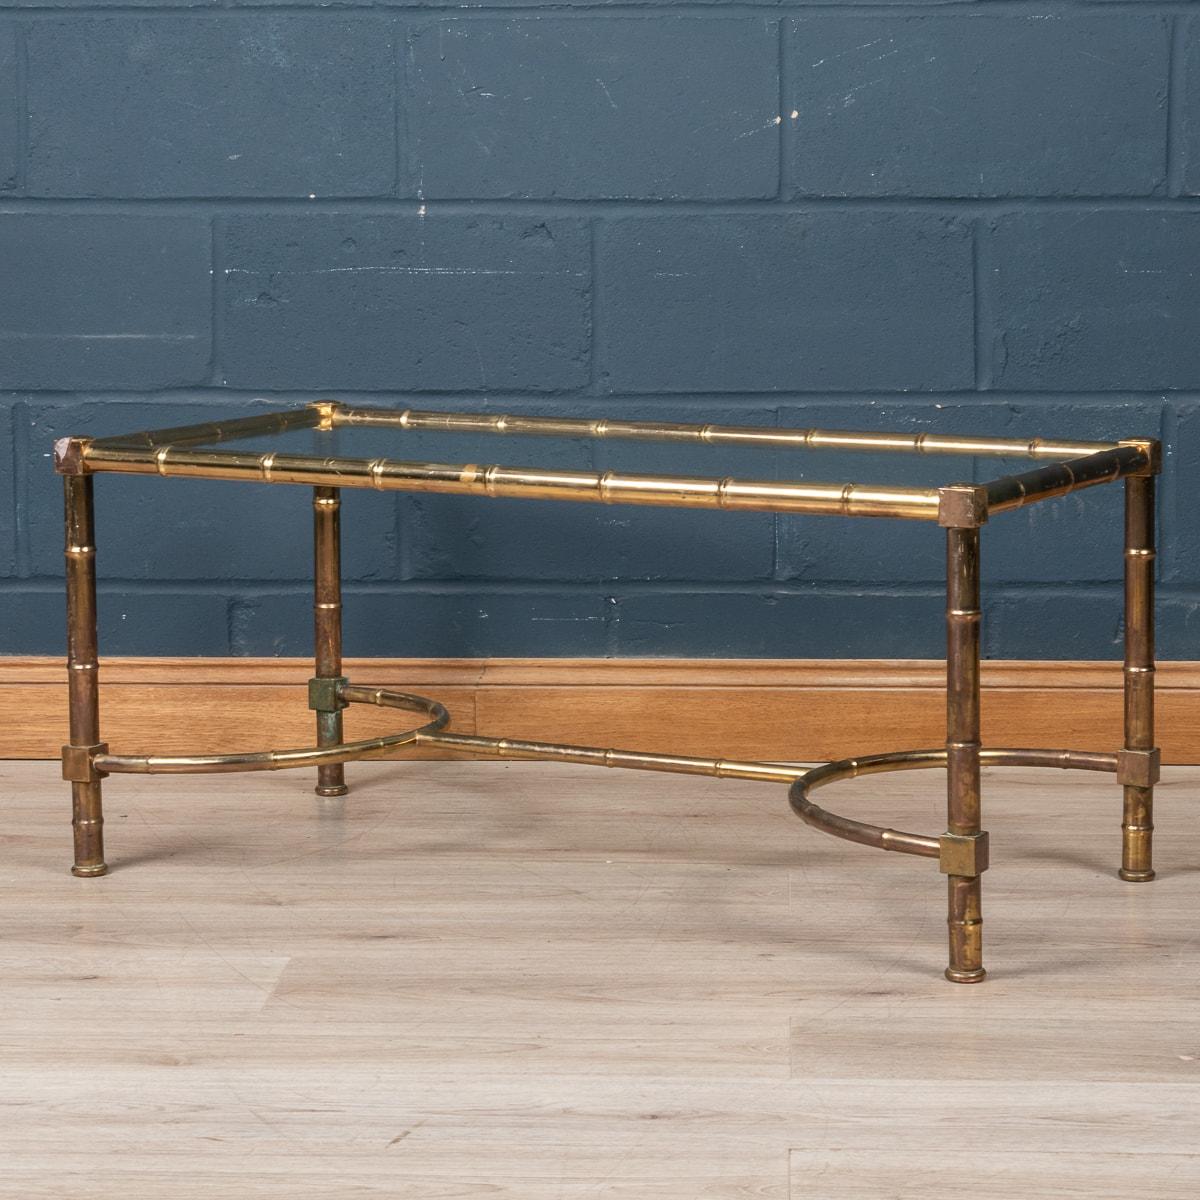 A large coffee table attributed to Maison Jansen, made in France around the 1970's. The faux bamboo frame made out of brass supporting a clear glass table top. A truly elegant solution for any interior looking to enrich the room with a little